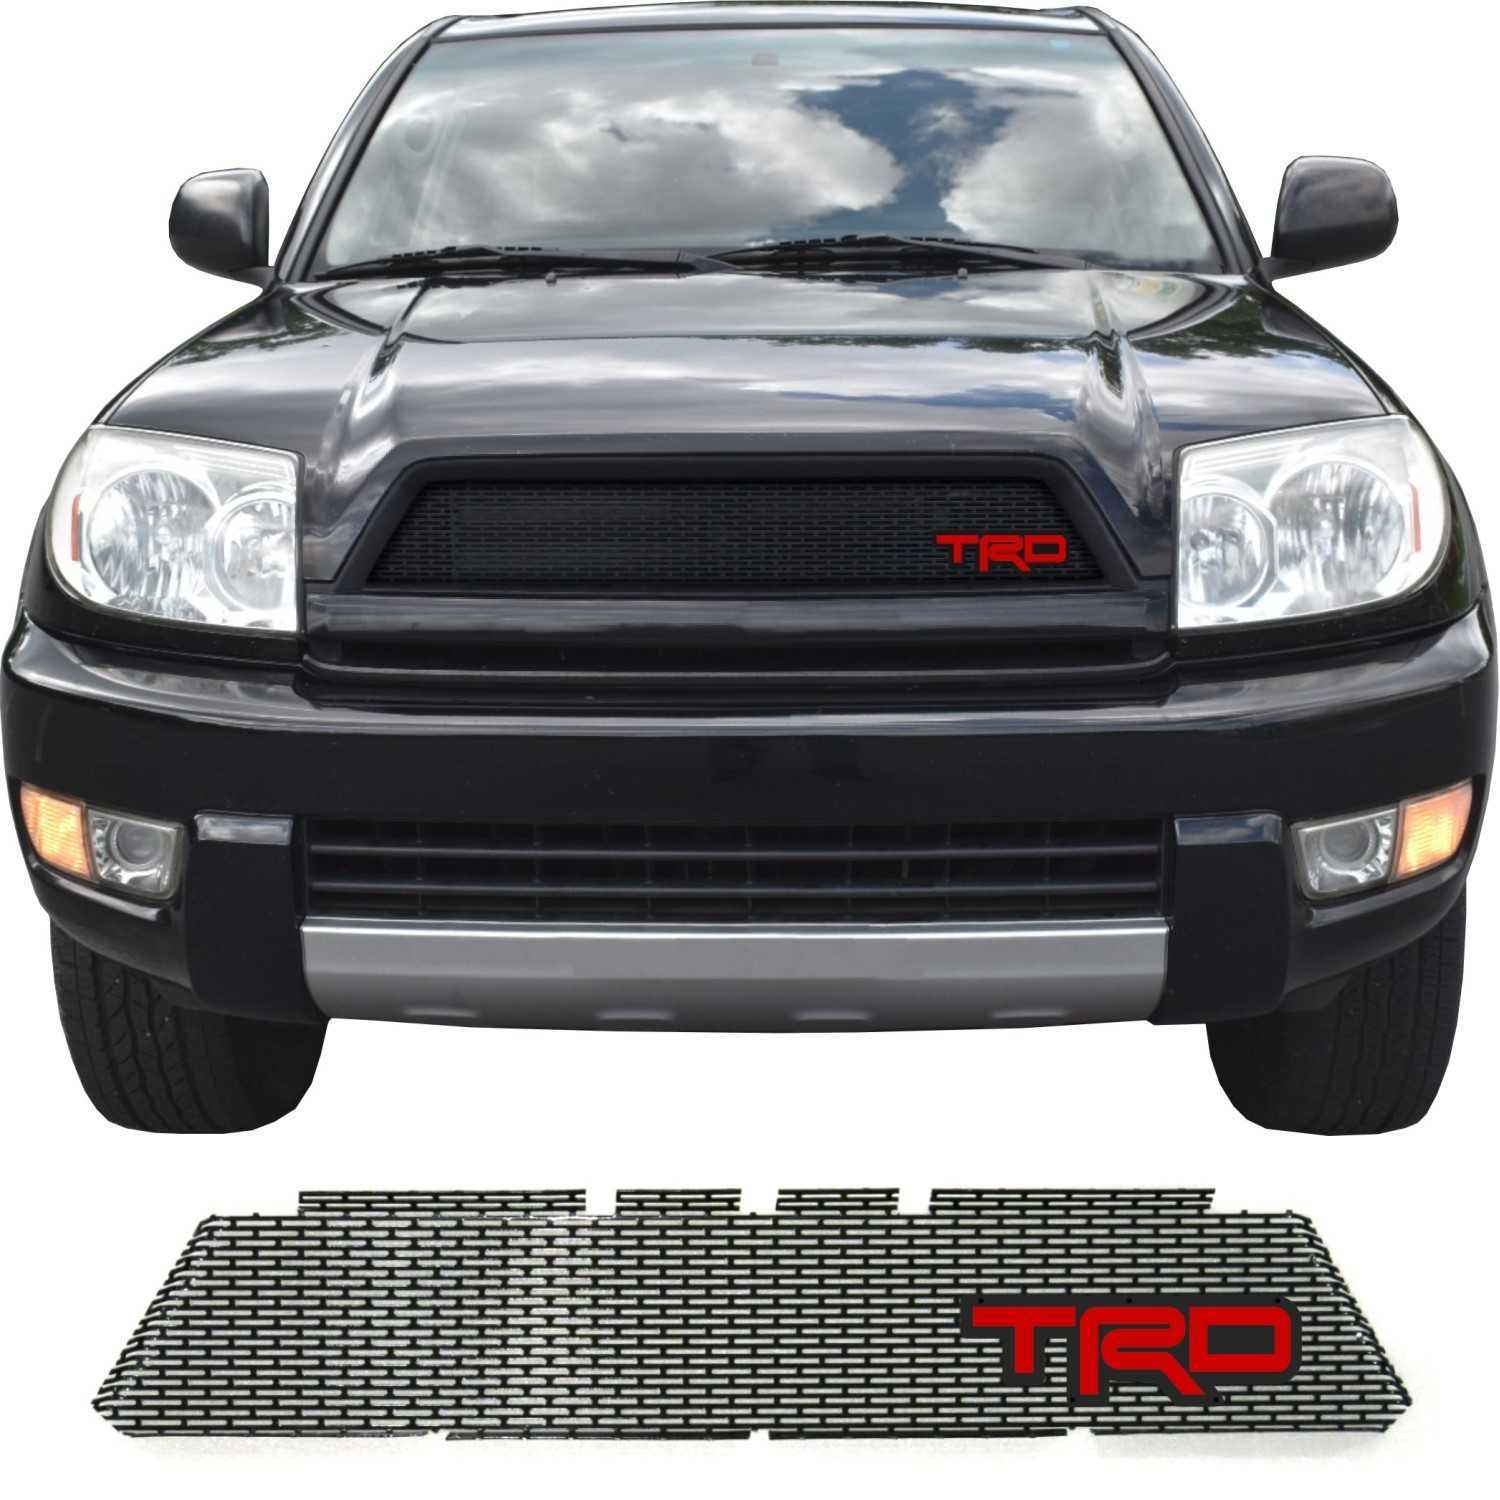 2003 - 2005 Toyota 4Runner Grill Mesh with TRD Emblem